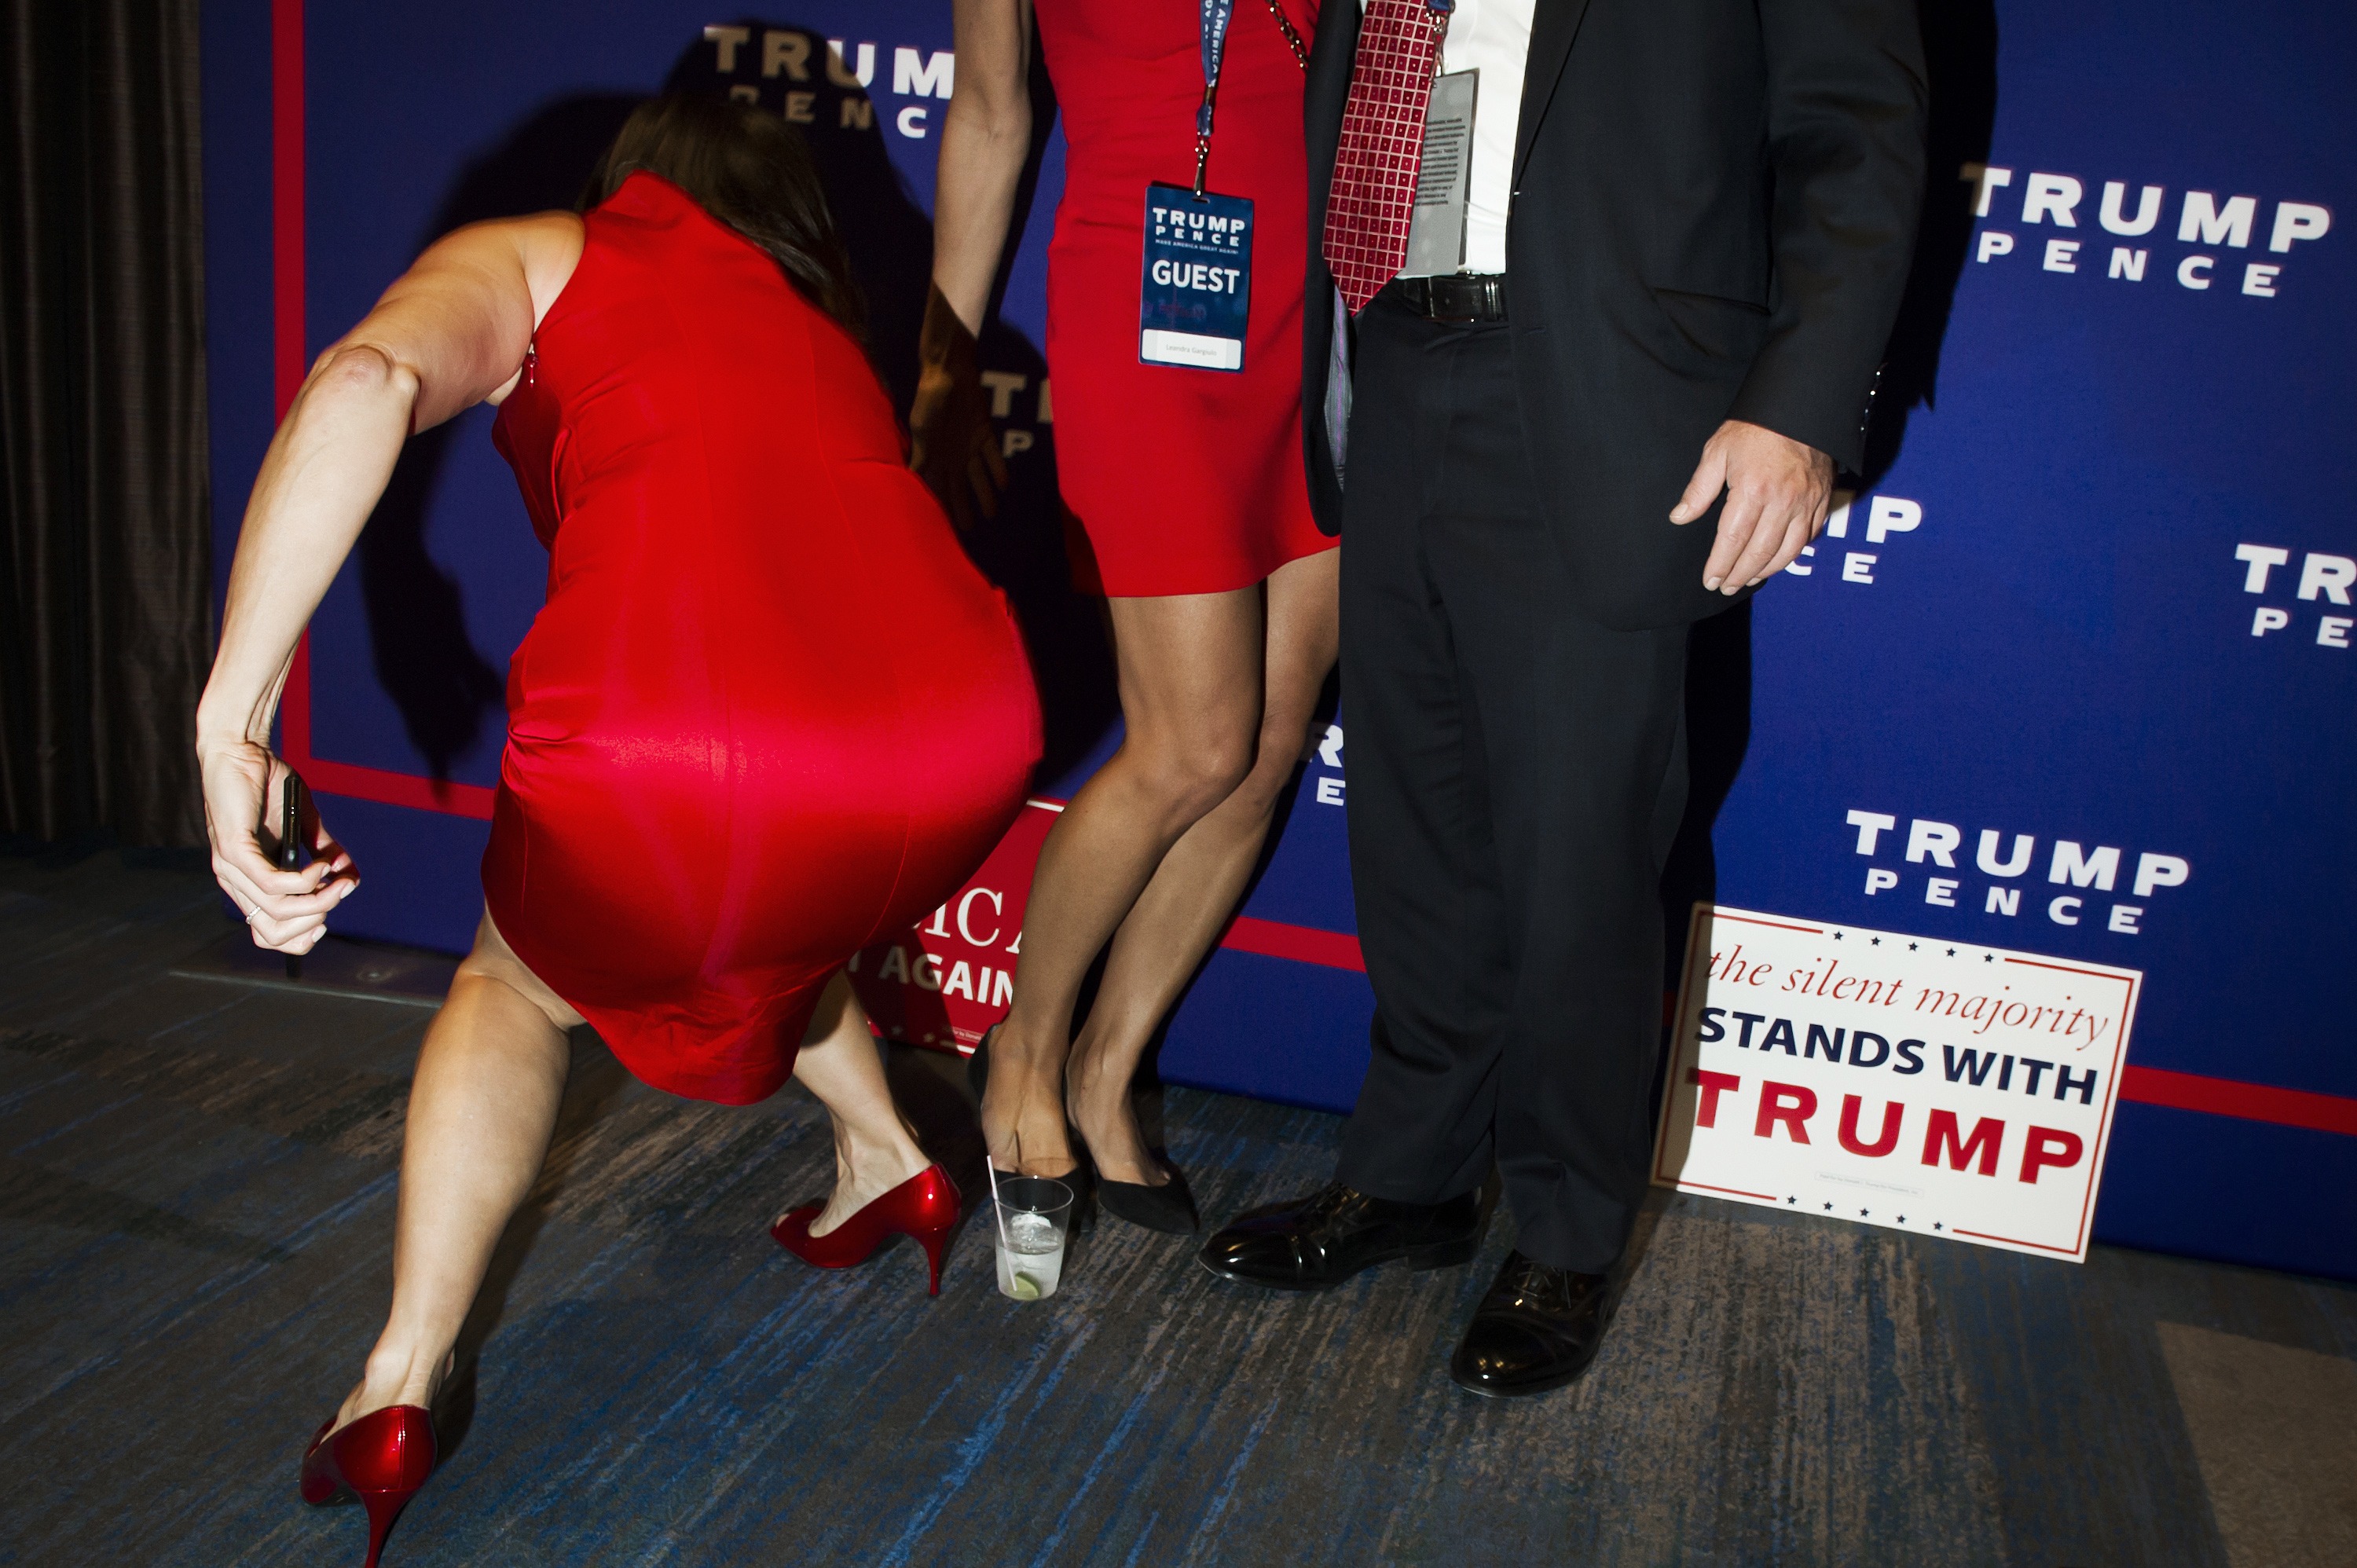 Scenes at an election night party for Republican presidential candidate Donald Trump, Tuesday, Nov. 8, 2016 in New York's Manhattan borough. Trump faces Democratic nominee Hillary Clinton in the contest for president of the United States.